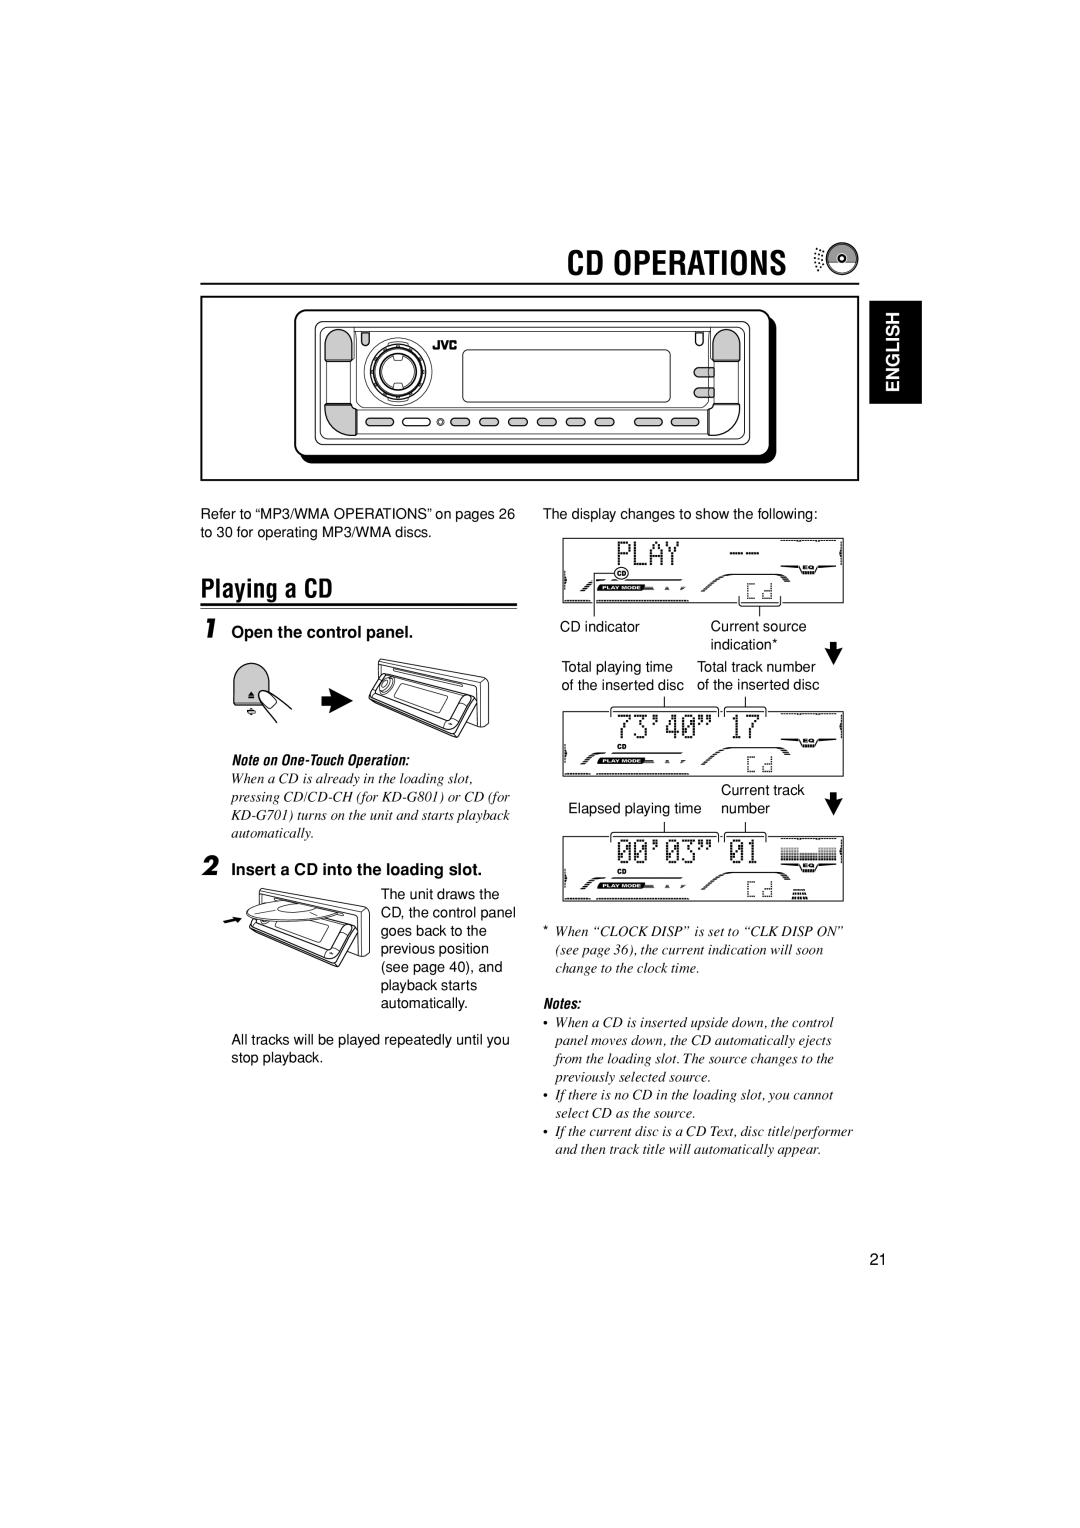 JVC GET0199-005A, GET0200-002A manual CD Operations, Playing a CD, Open the control panel, Insert a CD into the loading slot 